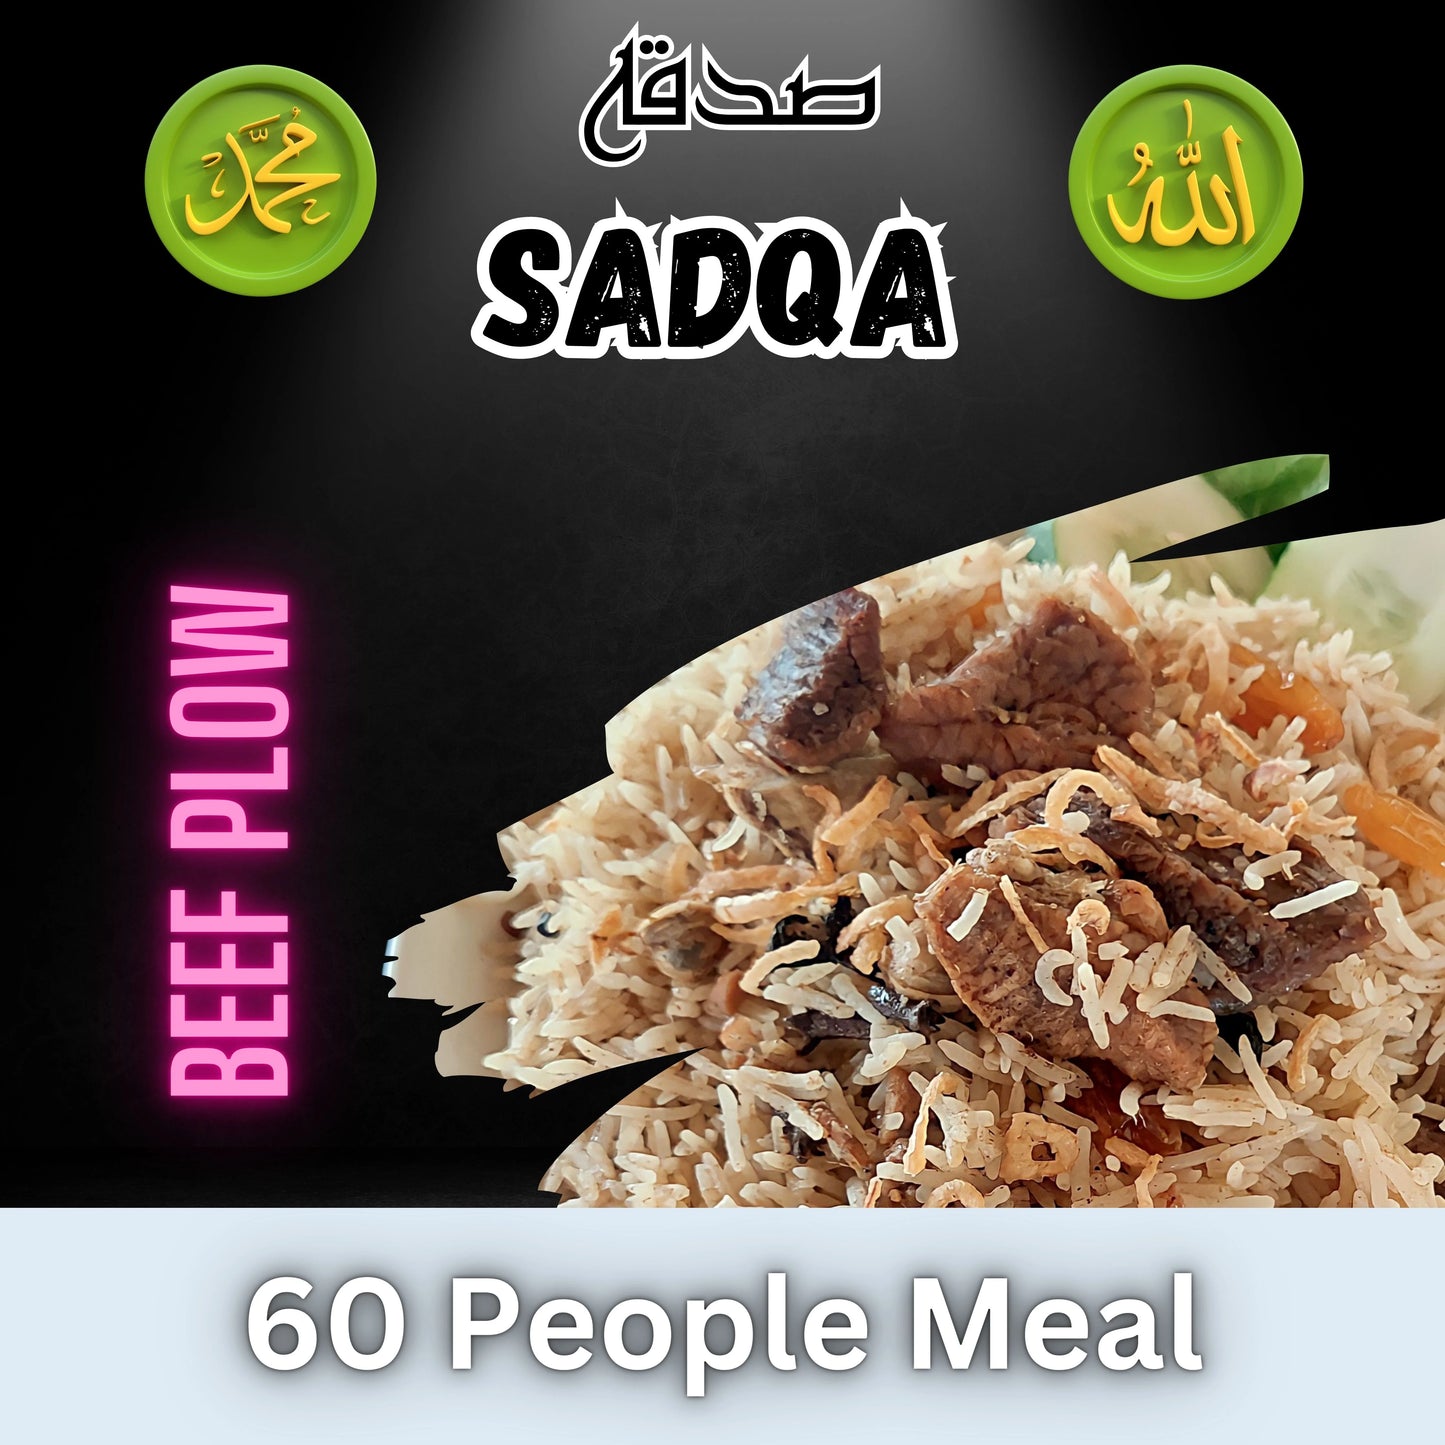 Sadqa meal for 60 people